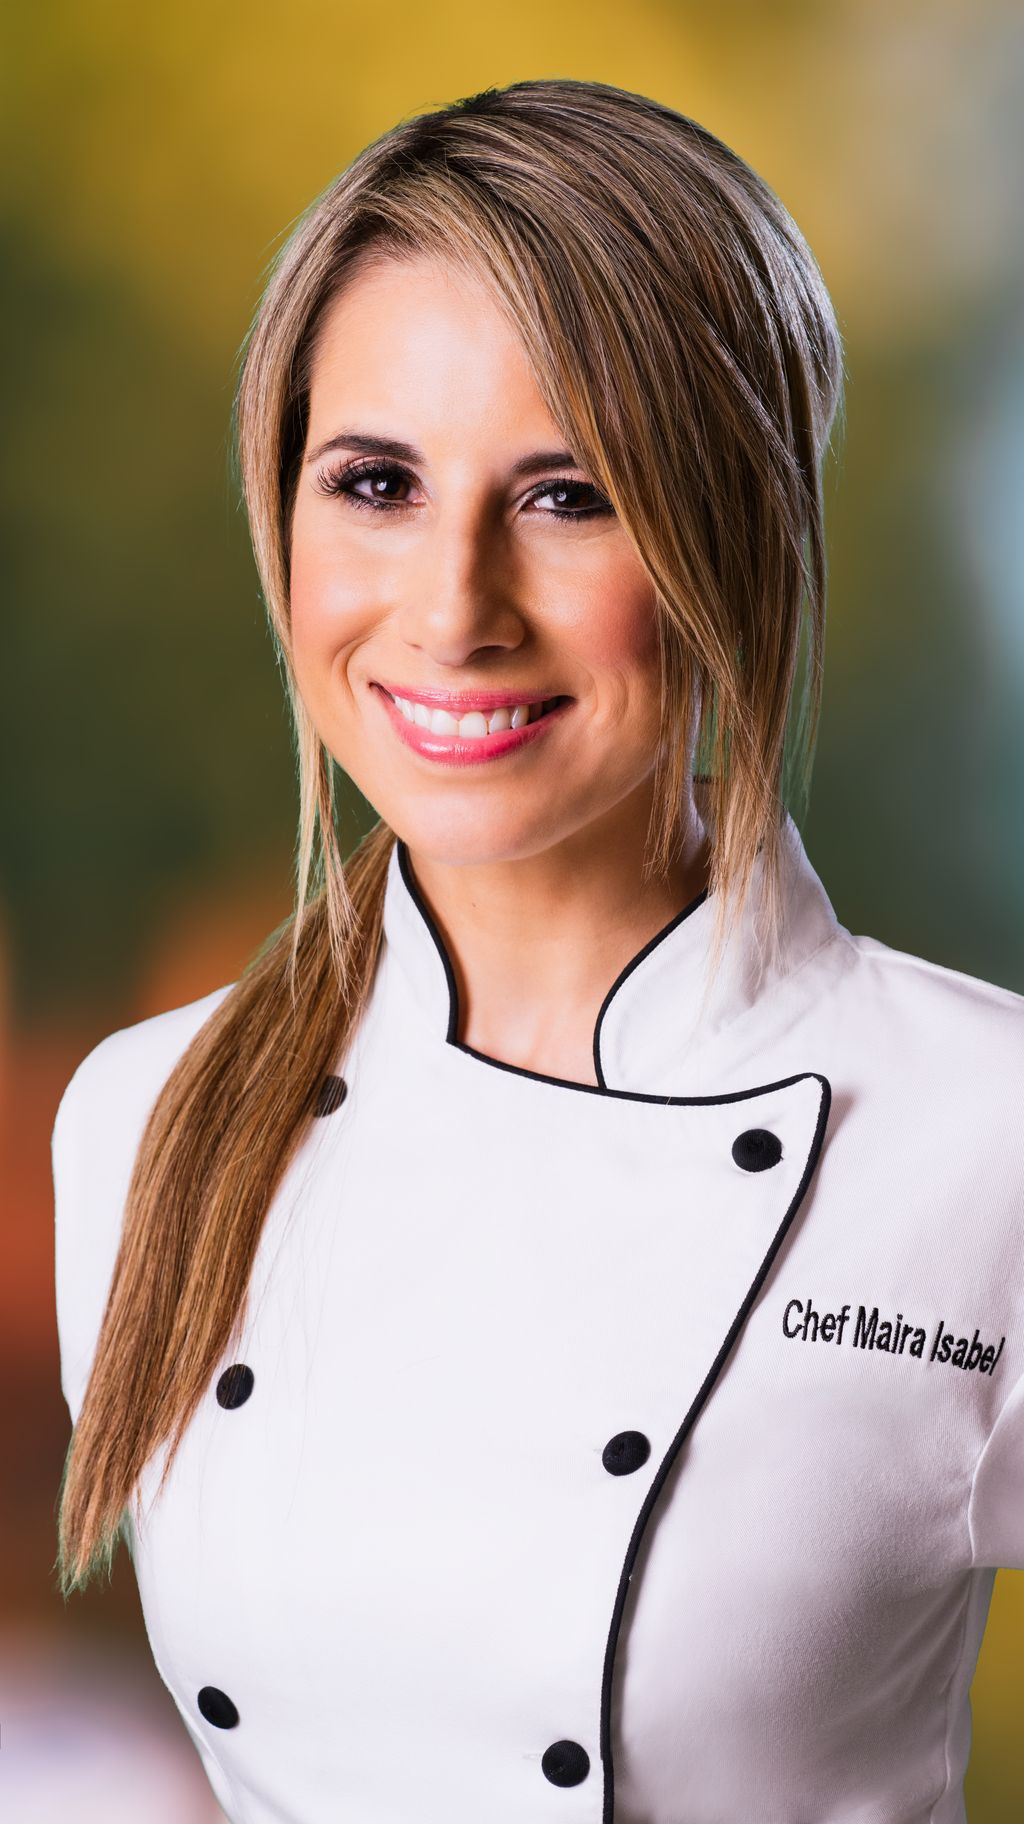 Chef Maira Isabel Services